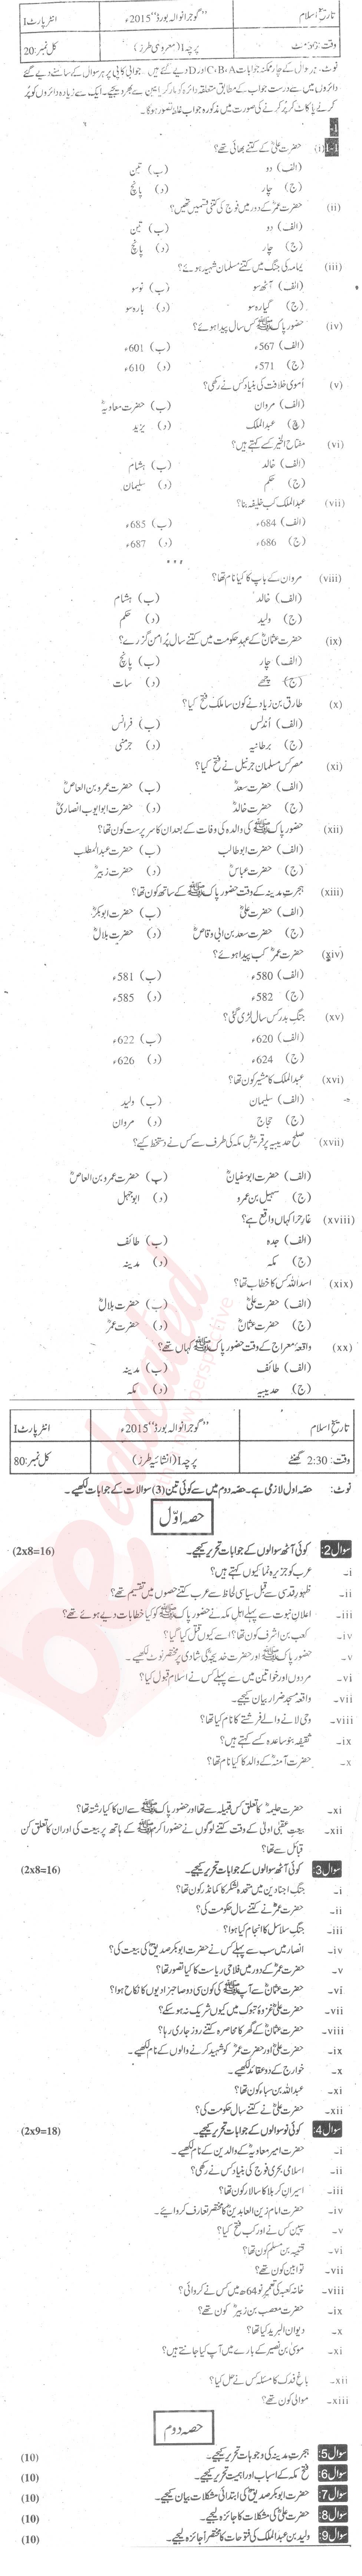 Islamic History FA Part 1 Past Paper Group 1 BISE Gujranwala 2015